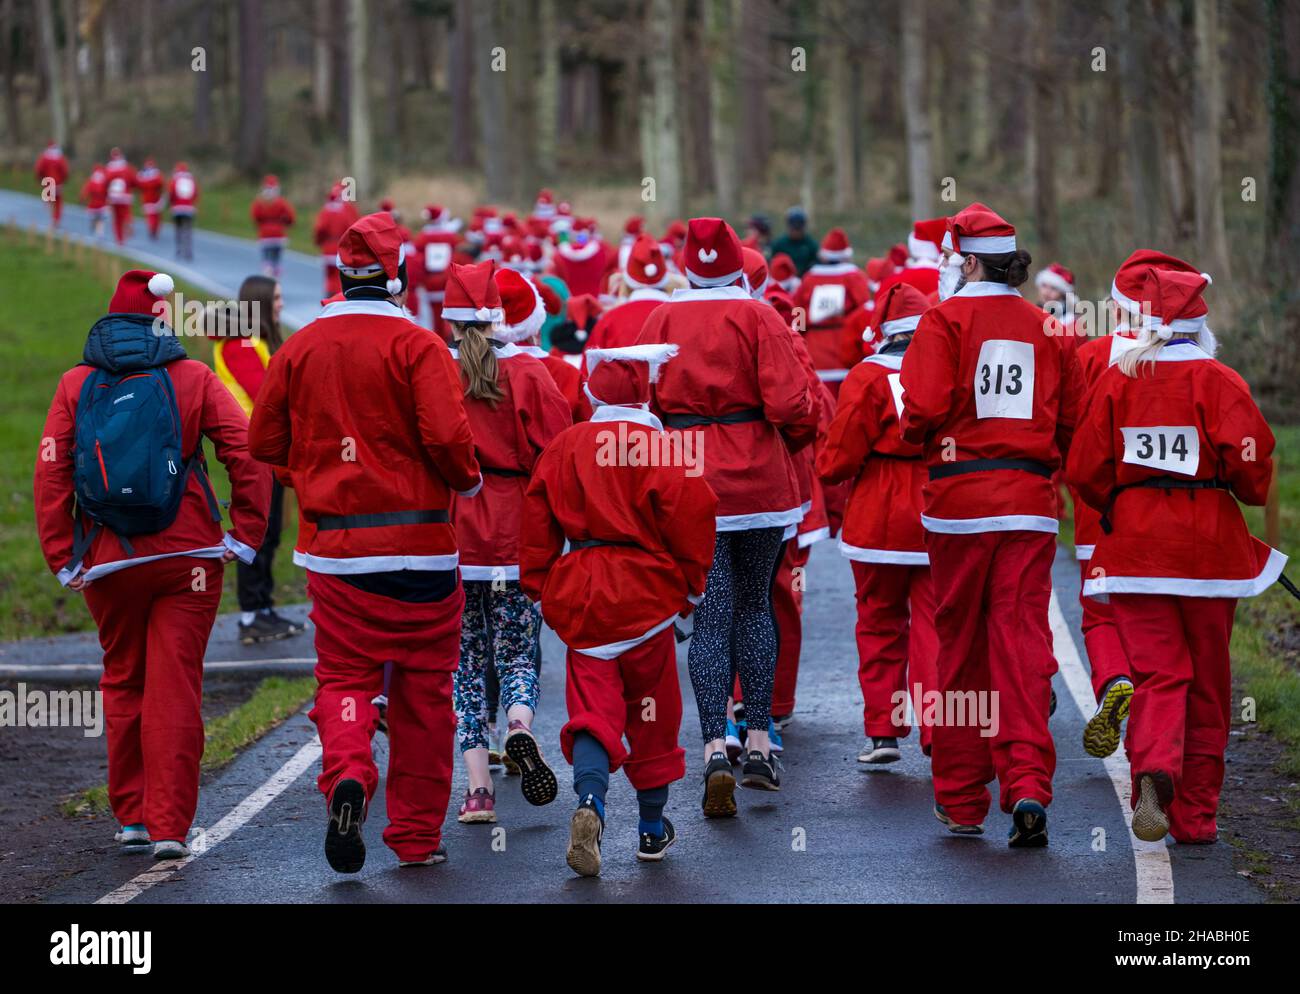 Dalkeith, Midlothian, Scotland, United Kingdom, 12th December 2021. Santa Run and Elf Dash: the charity fund-raising event takes place in Dalkeith Country Park to raise money for CHAS (Children’s Hospices Across Scotland) Pictured: participants in the Santa Run dash off into the woodland estate Stock Photo